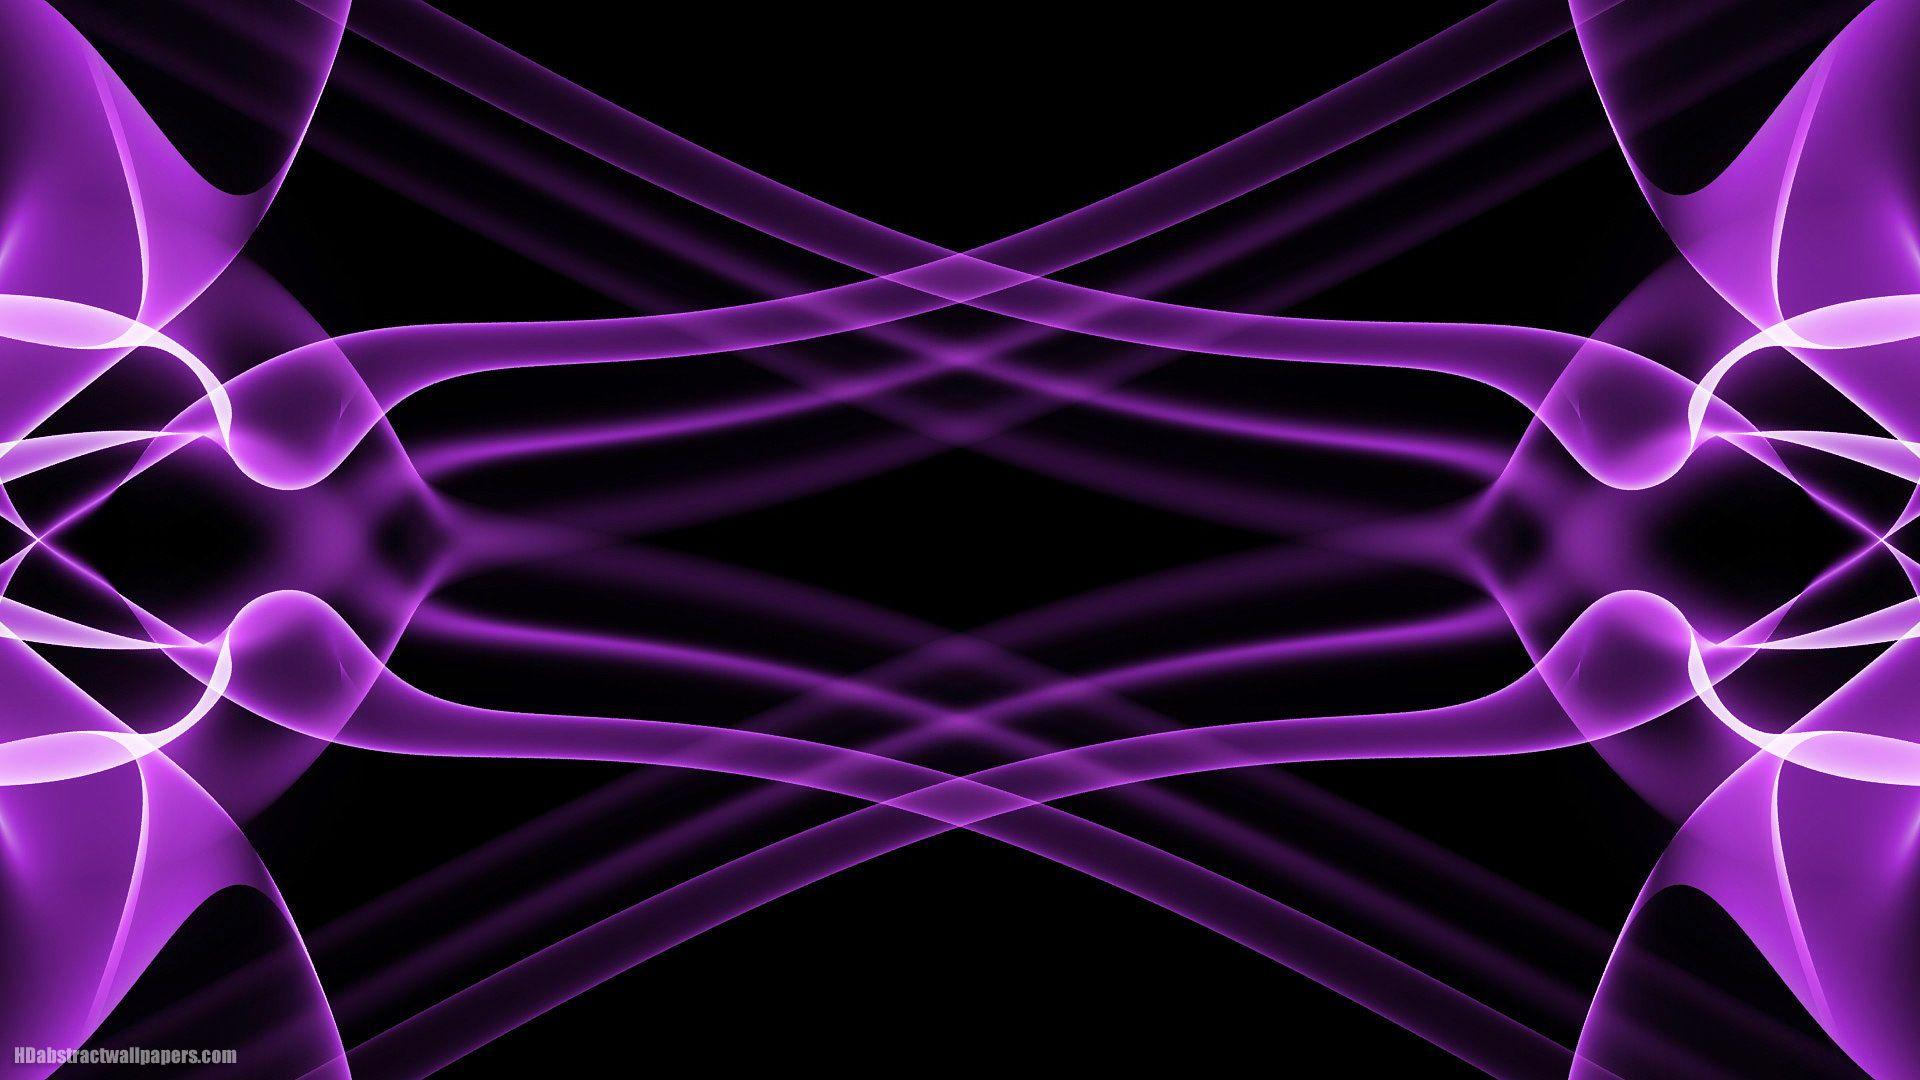 Abstract purple wallpaper with black background. HD Abstract Wallpaper